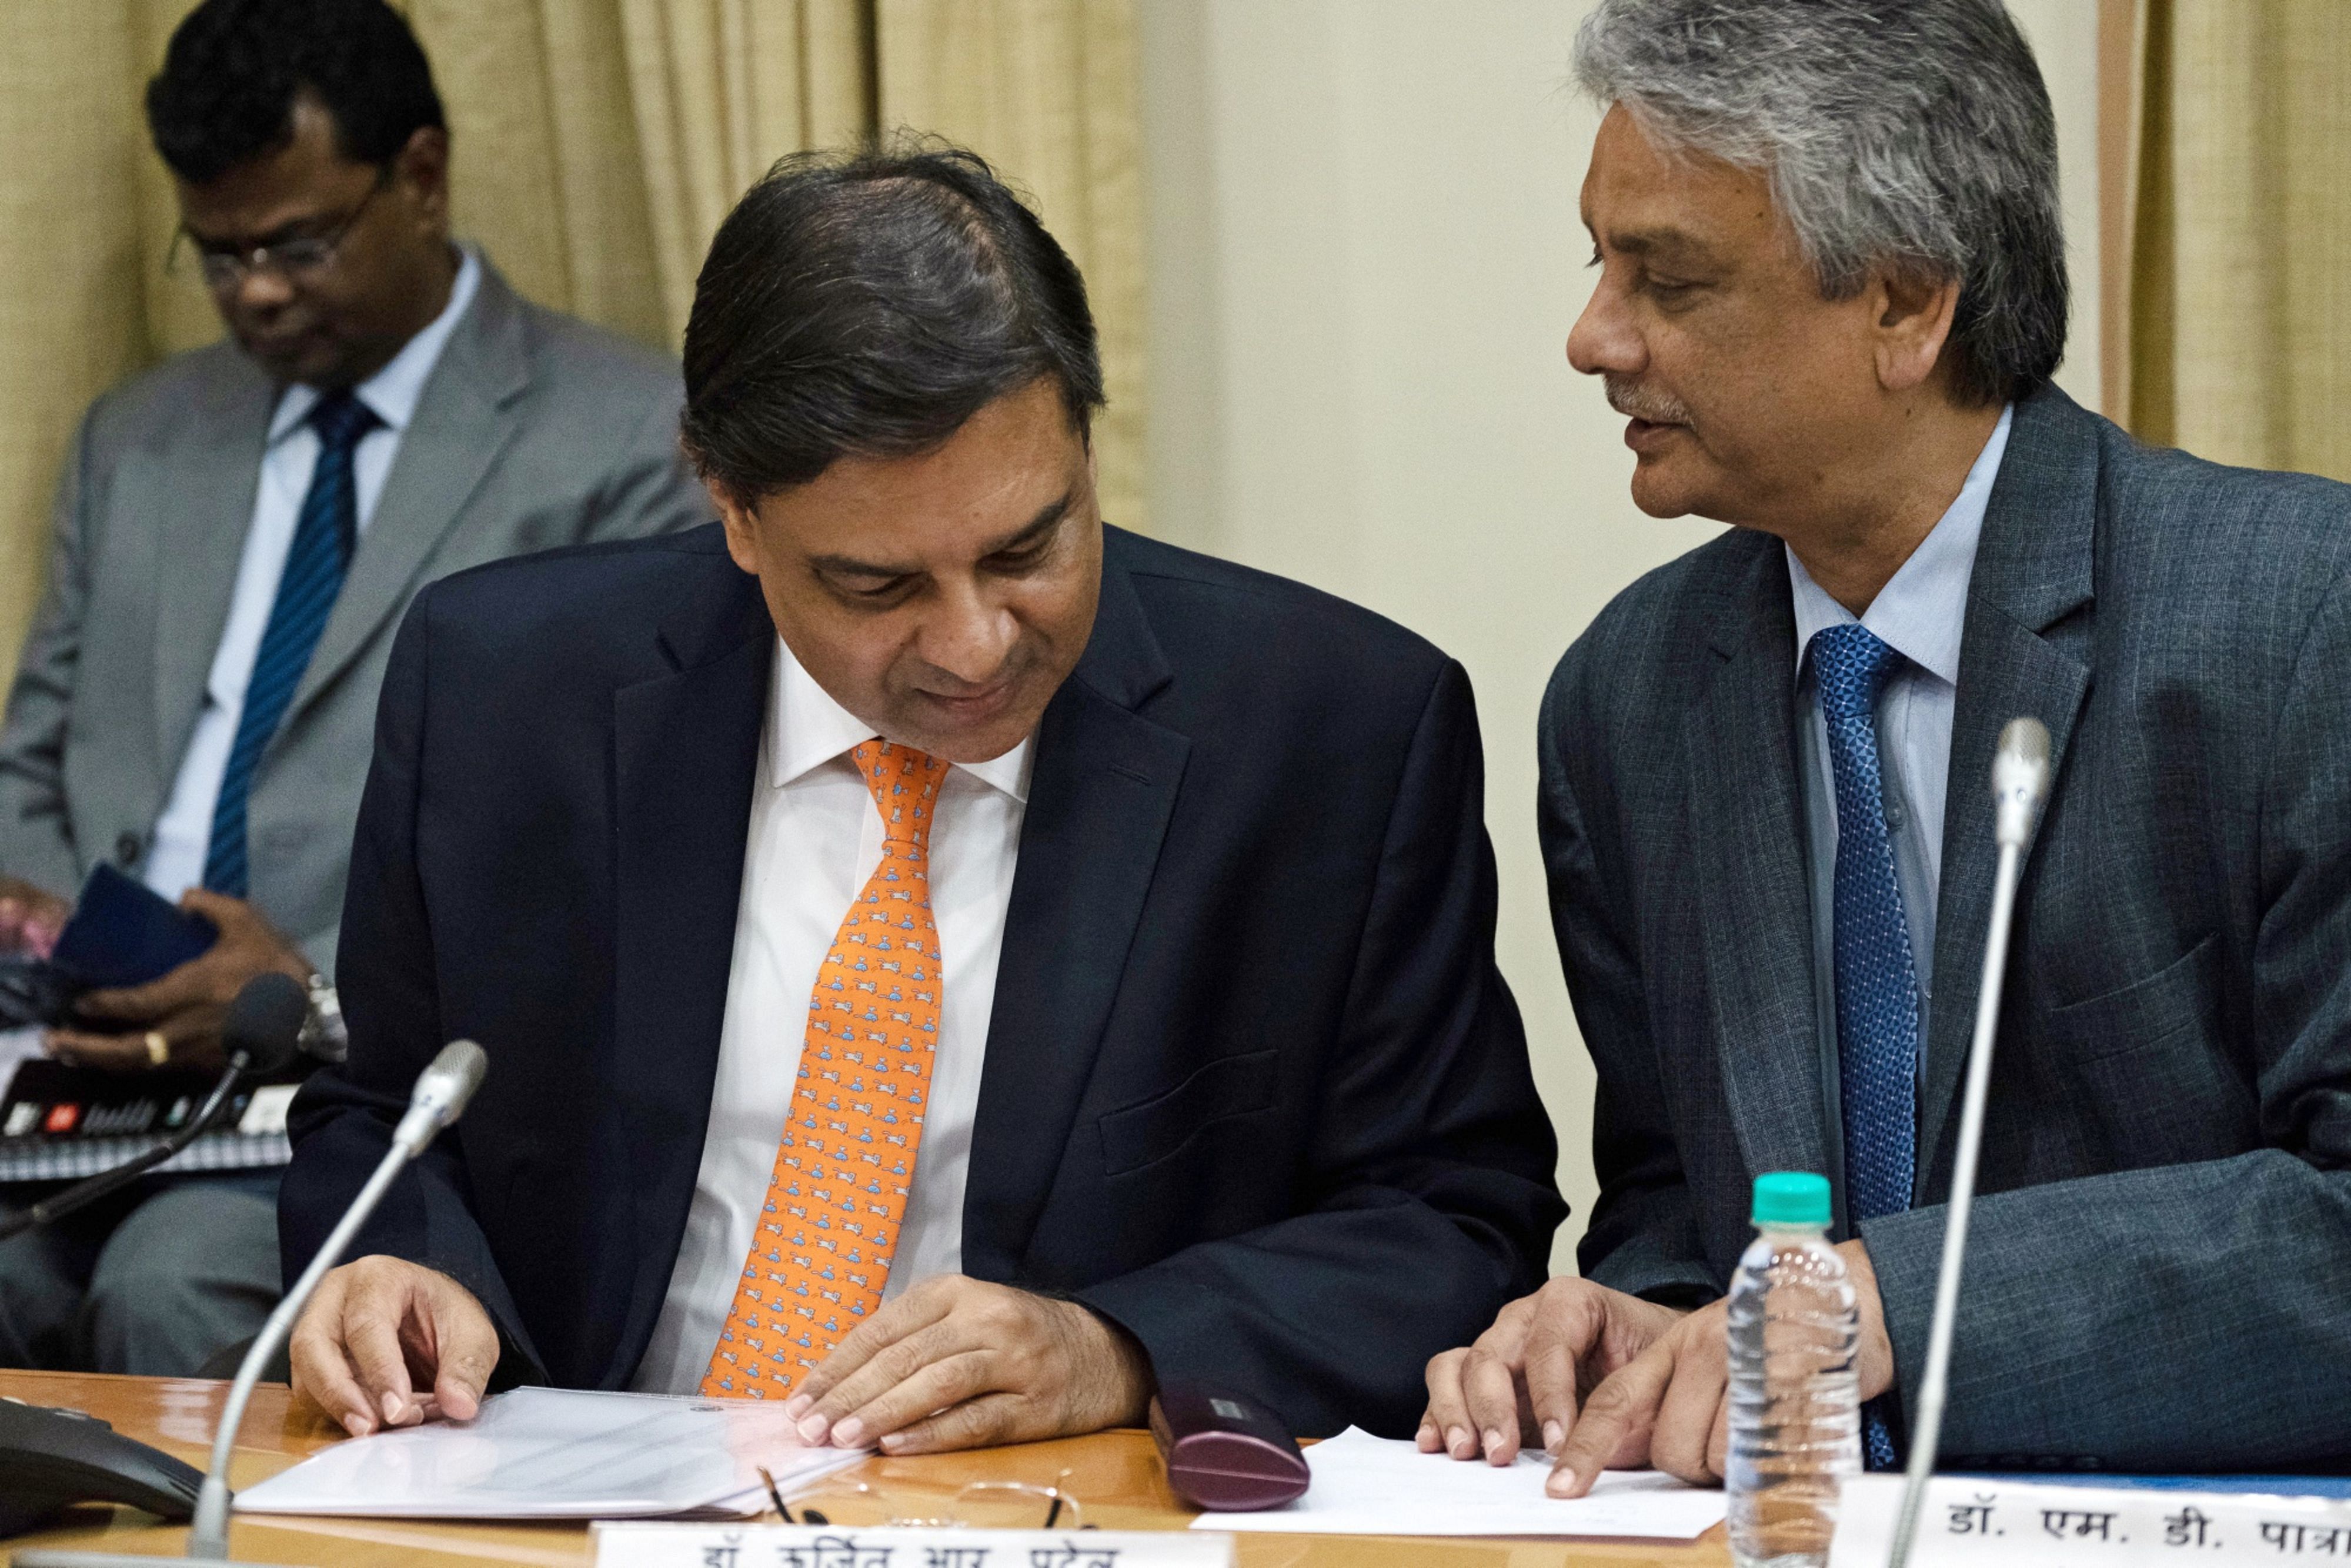 Patra, right, speaks to former RBI Governor Urjit Patel during a news conference in Mumbai on Dec. 5, 2018. (Photo: Karen Dias/Bloomberg)